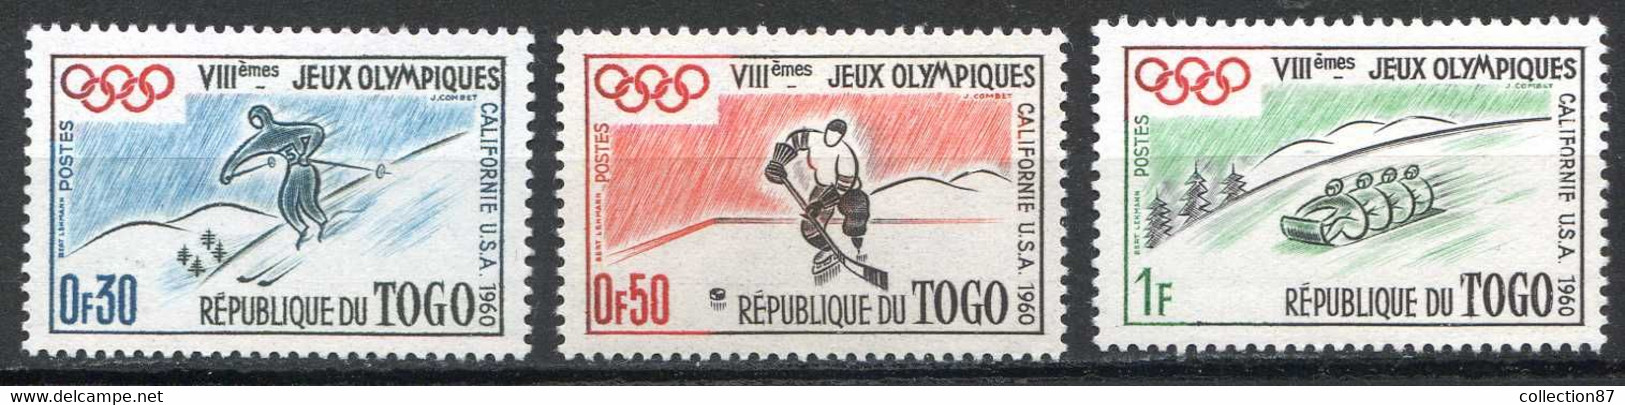 JEUX OLYMPIQUES D'HIVER 1960 ⭐⭐ TOGO 3 Valeurs NEUF Luxe - MNH ⭐⭐ > SKI - HOCKEY - LUGE - Inverno1960: Squaw Valley